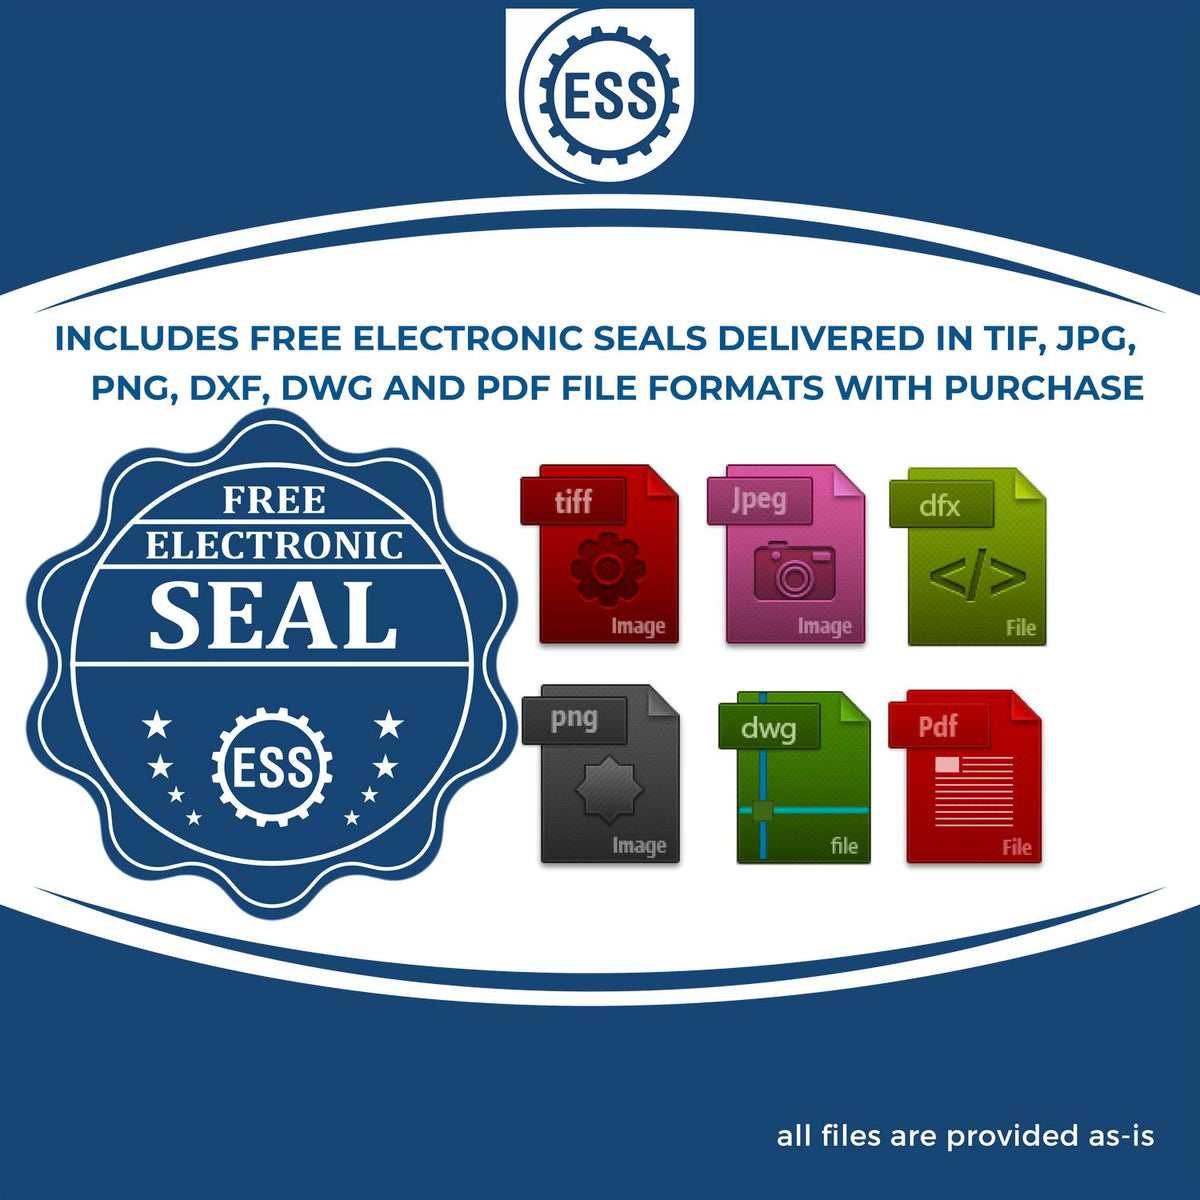 An infographic for the free electronic seal for the State of Illinois Extended Long Reach Geologist Seal illustrating the different file type icons such as DXF, DWG, TIF, JPG and PNG.